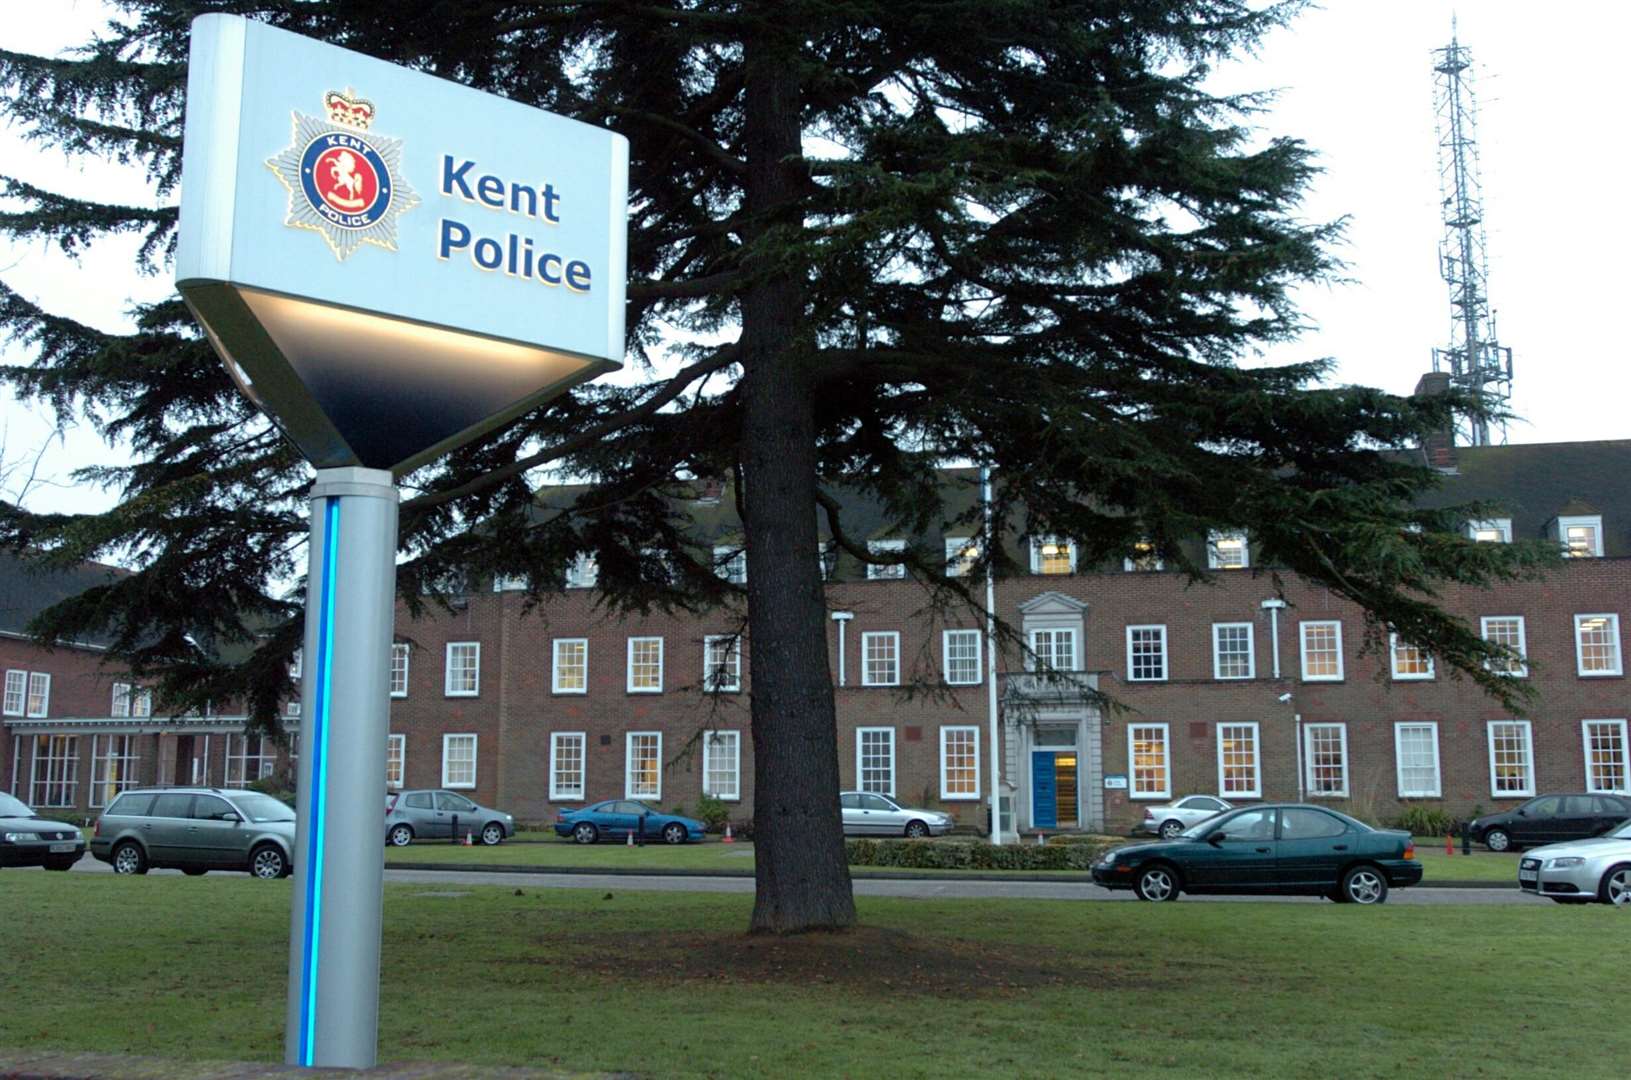 PC Quinn was brought before a disciplinary panel at Kent Police Headquarters